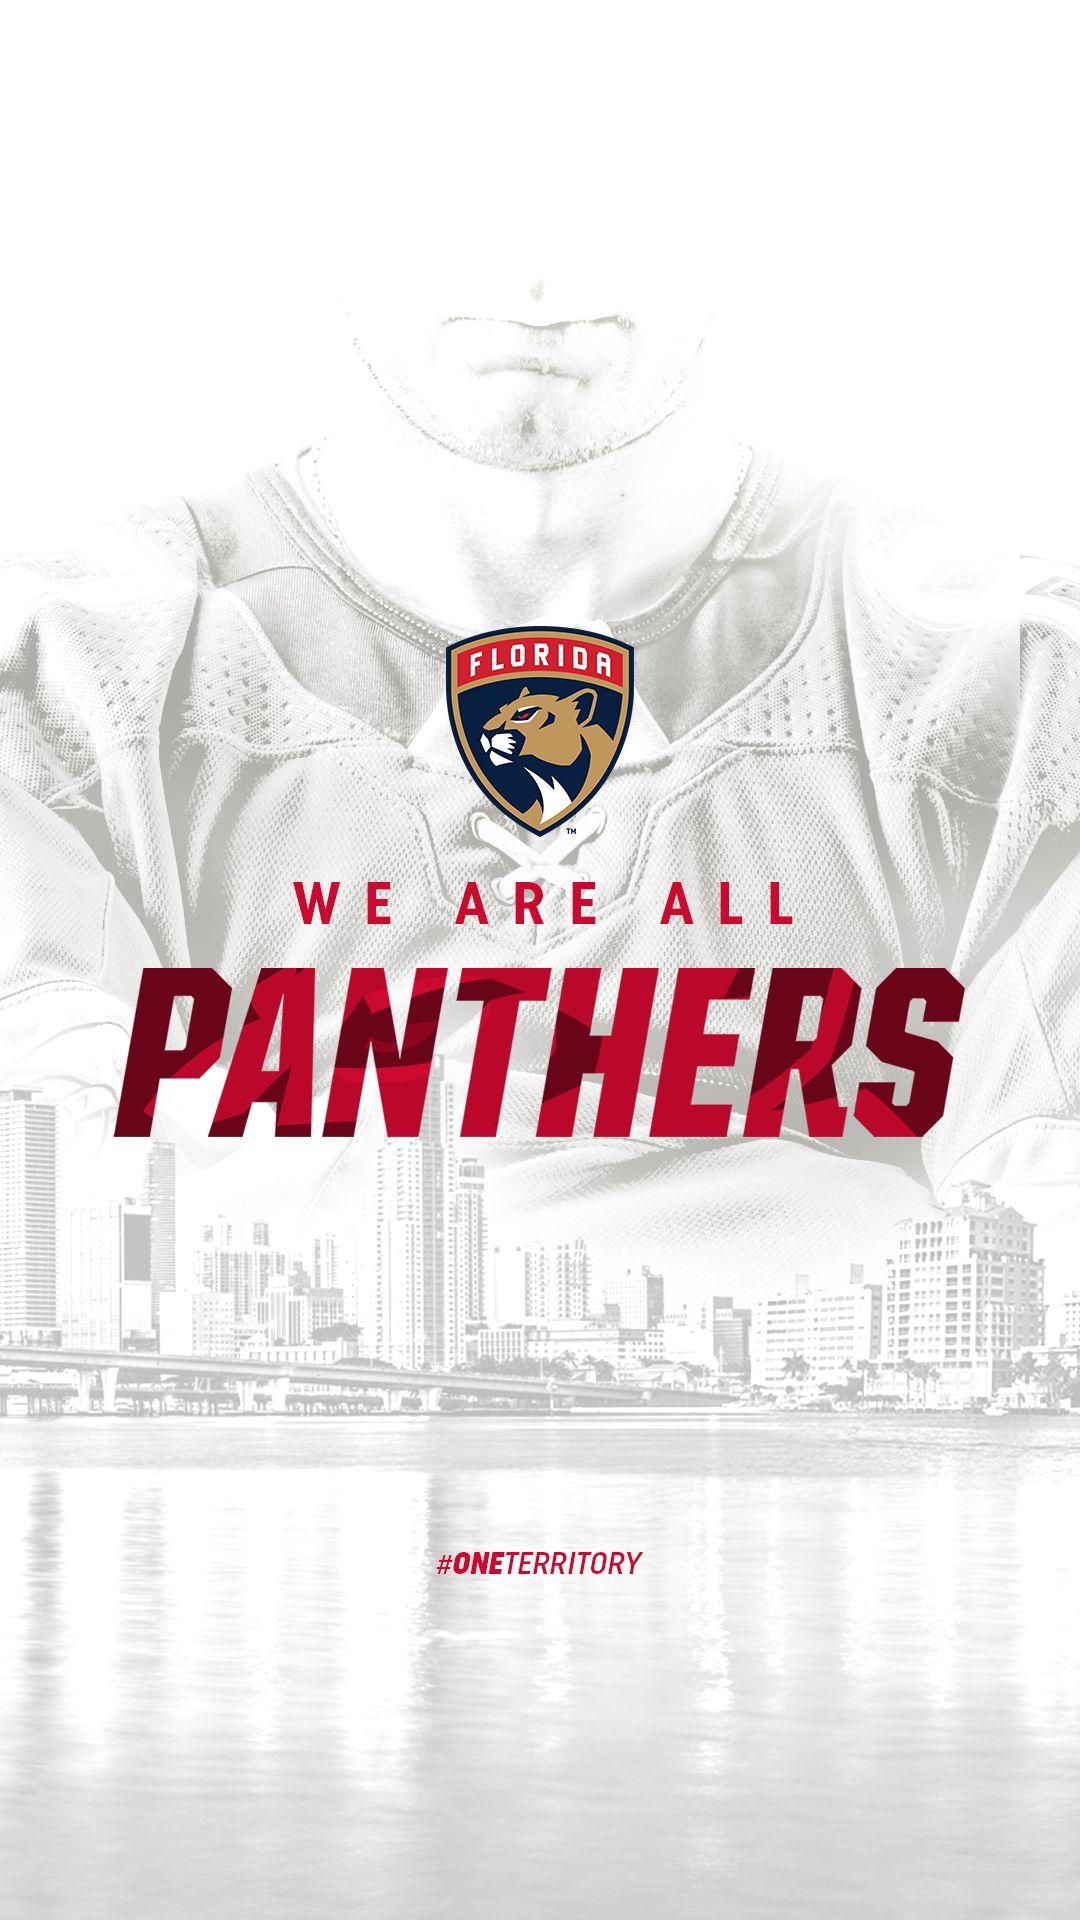 Florida Panthers on Twitter ggood19 Try it like this for a mobile  wallpaper httpstcoVoyueqndh1  Twitter